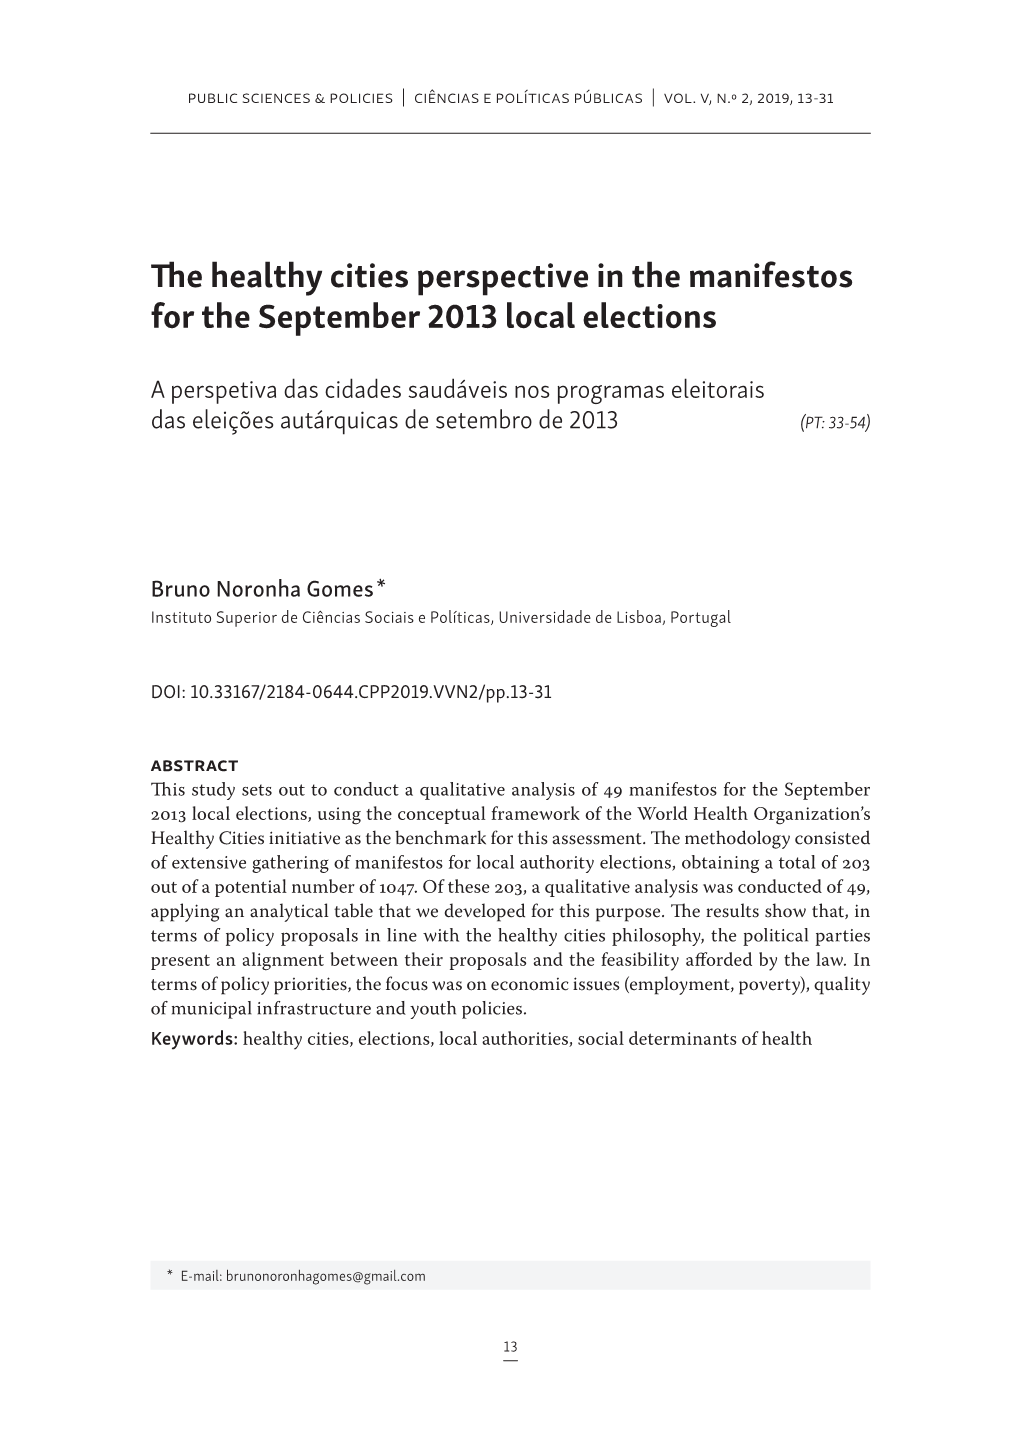 The Healthy Cities Perspective in the Manifestos for the September 2013 Local Elections